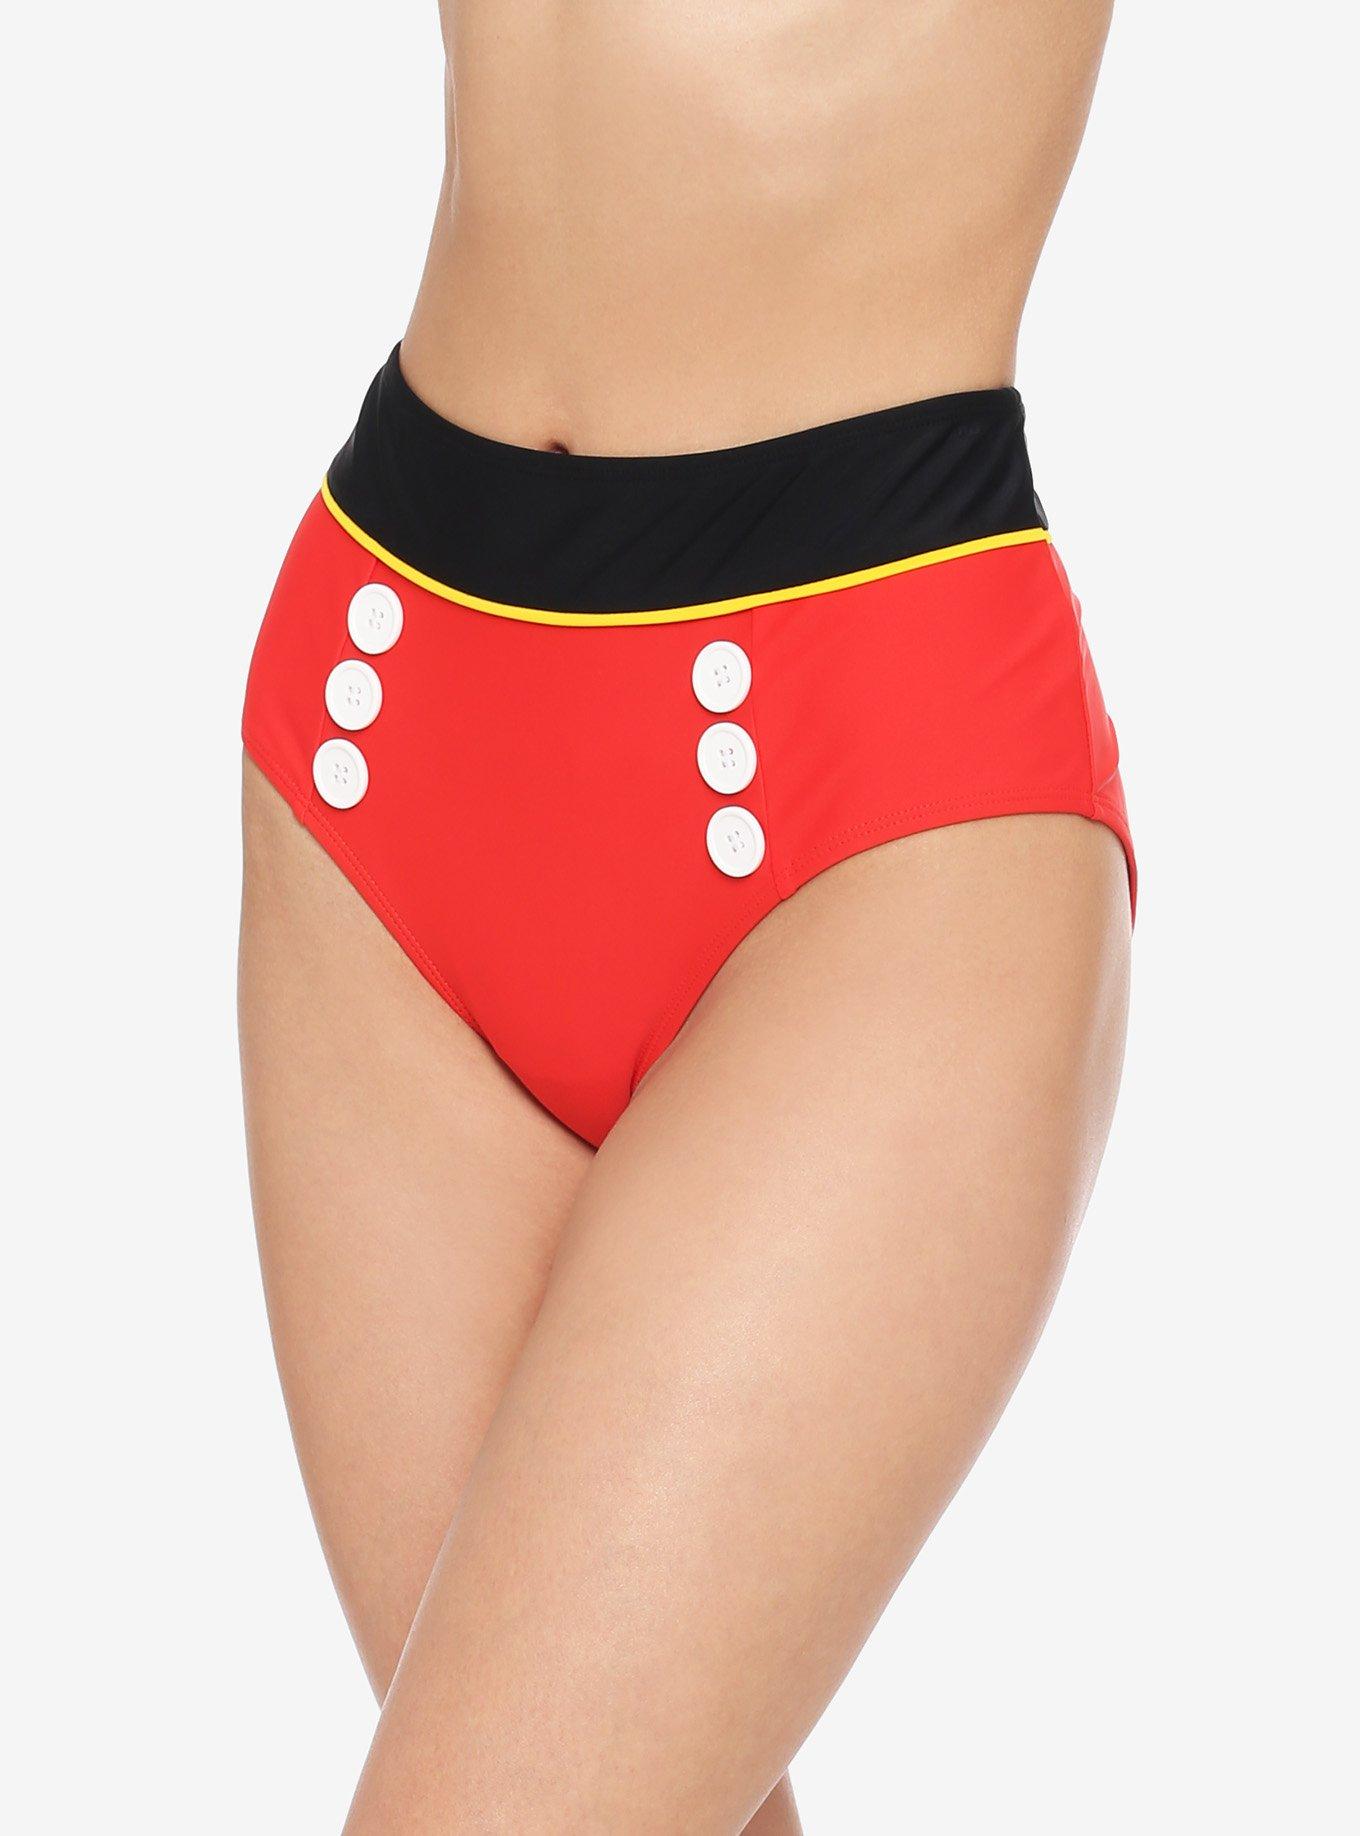 Disney Mickey Mouse High-Waisted Swim Bottoms, MULTI, hi-res